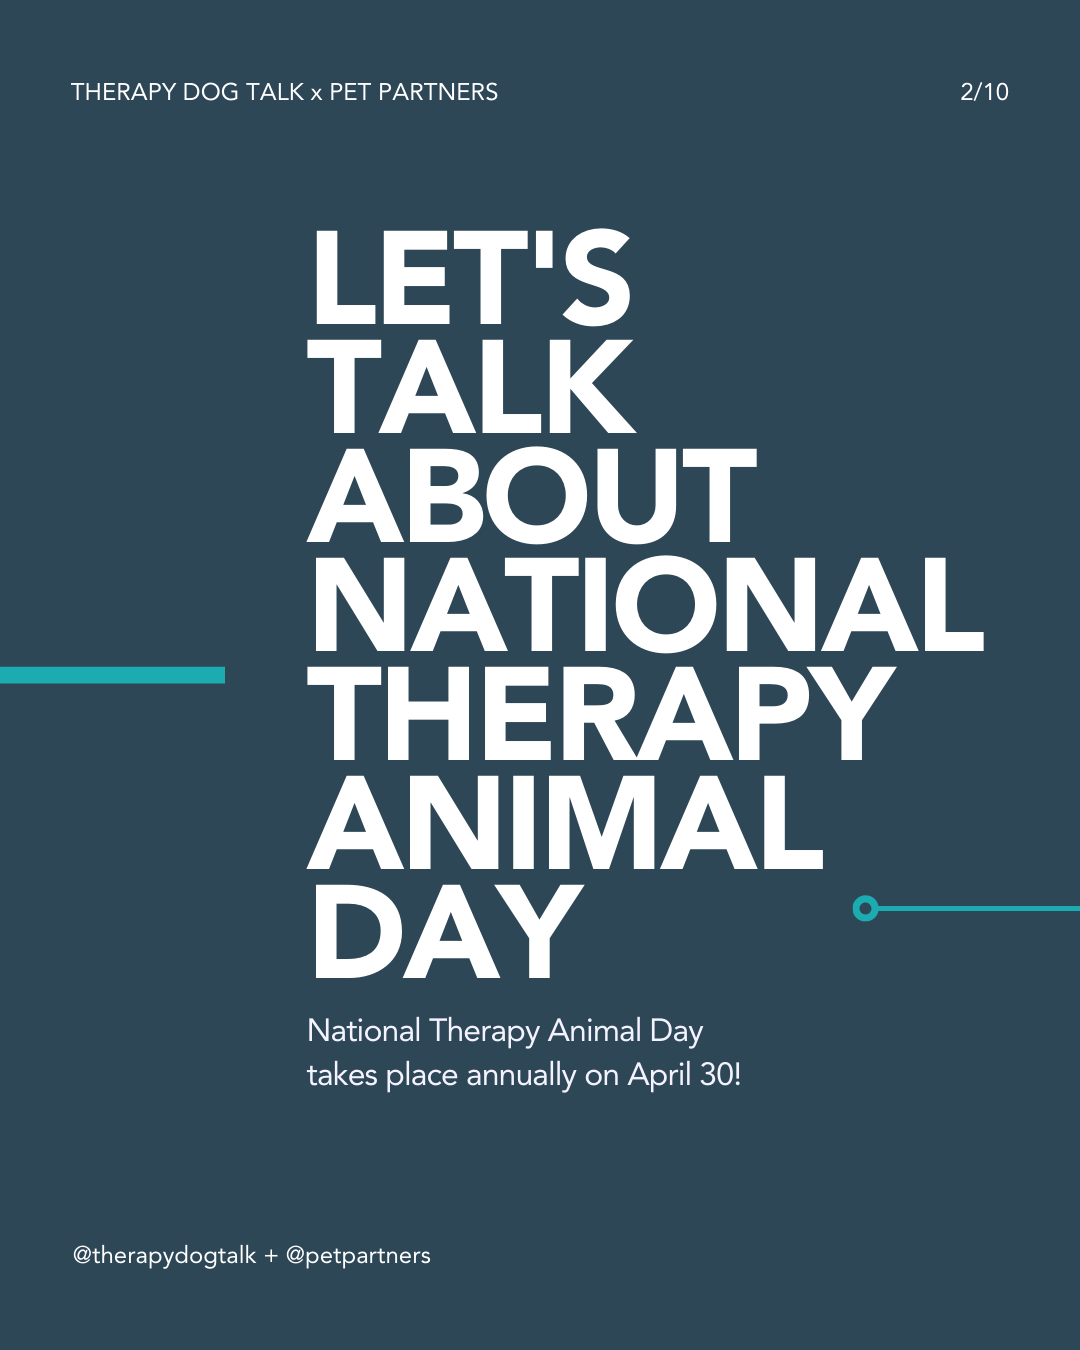 6 ways to celebrate National Therapy Animal Day